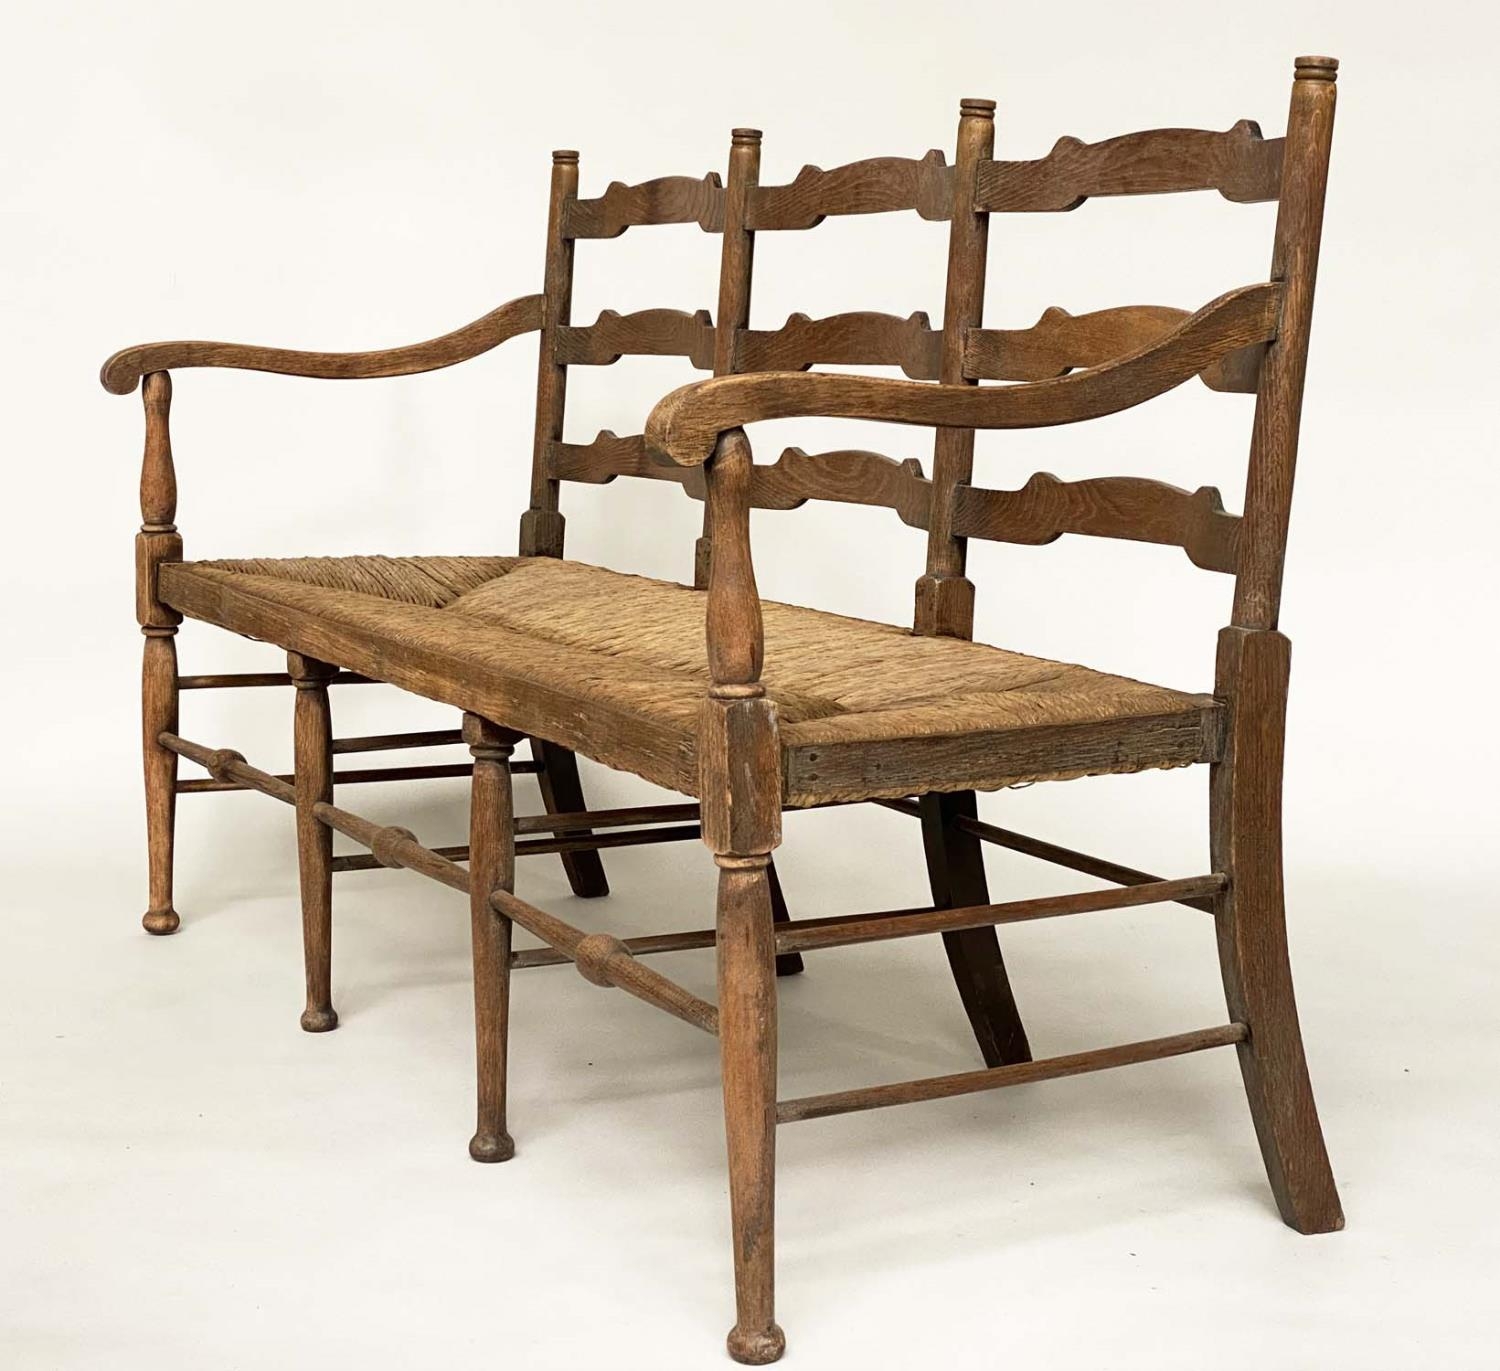 HALL BENCH, early 20th century English oak with ladder back and rush seat, 157cm W. - Image 7 of 10